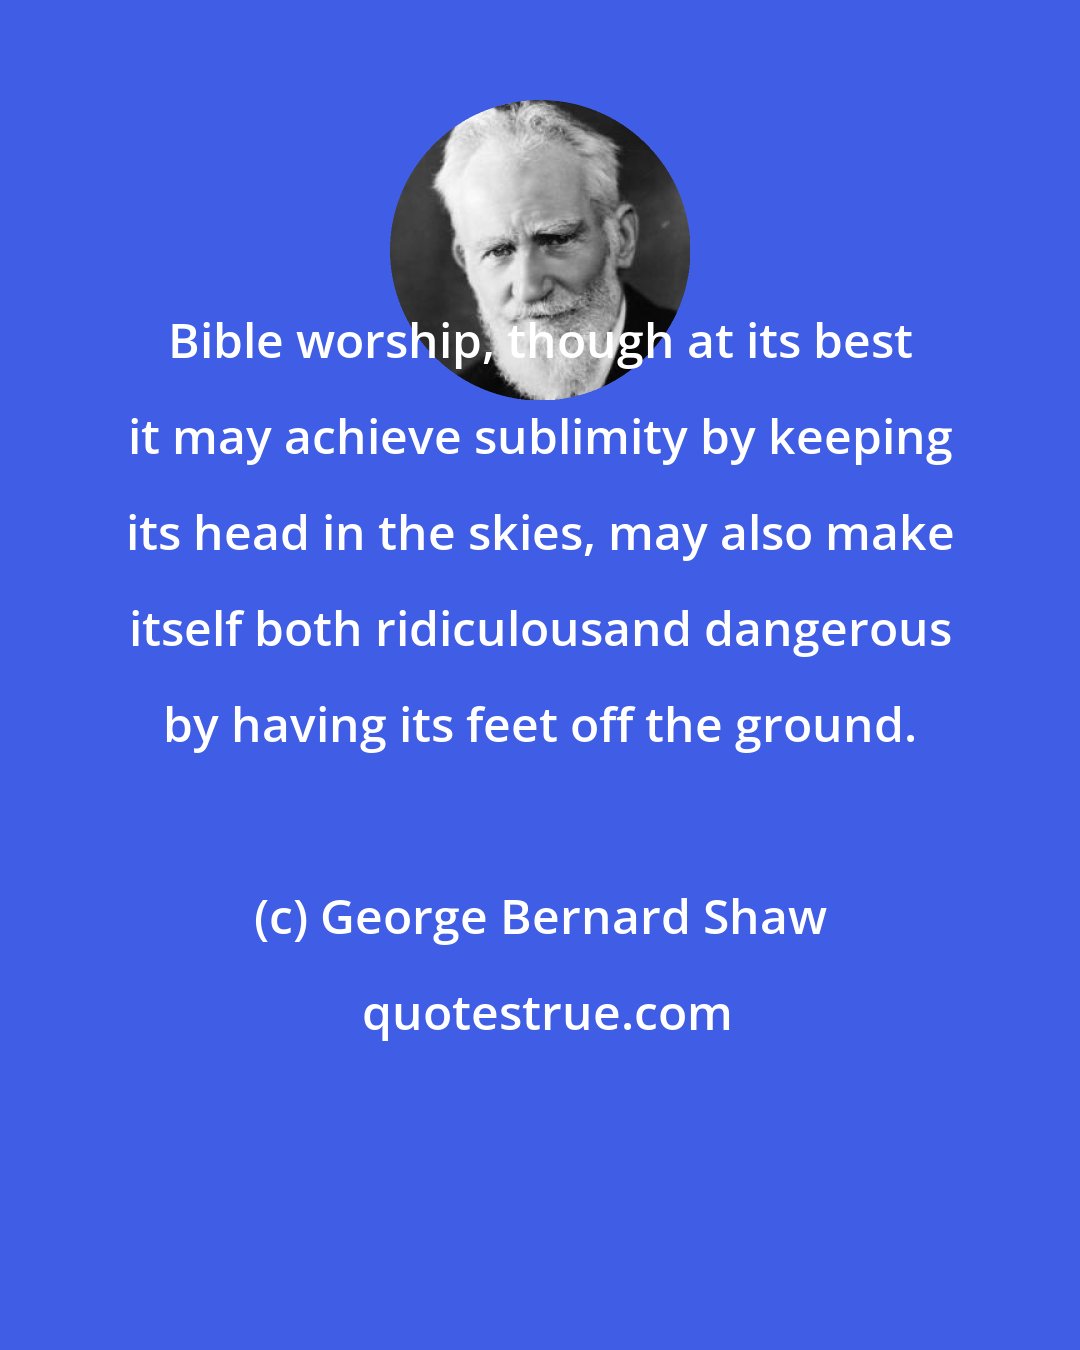 George Bernard Shaw: Bible worship, though at its best it may achieve sublimity by keeping its head in the skies, may also make itself both ridiculousand dangerous by having its feet off the ground.